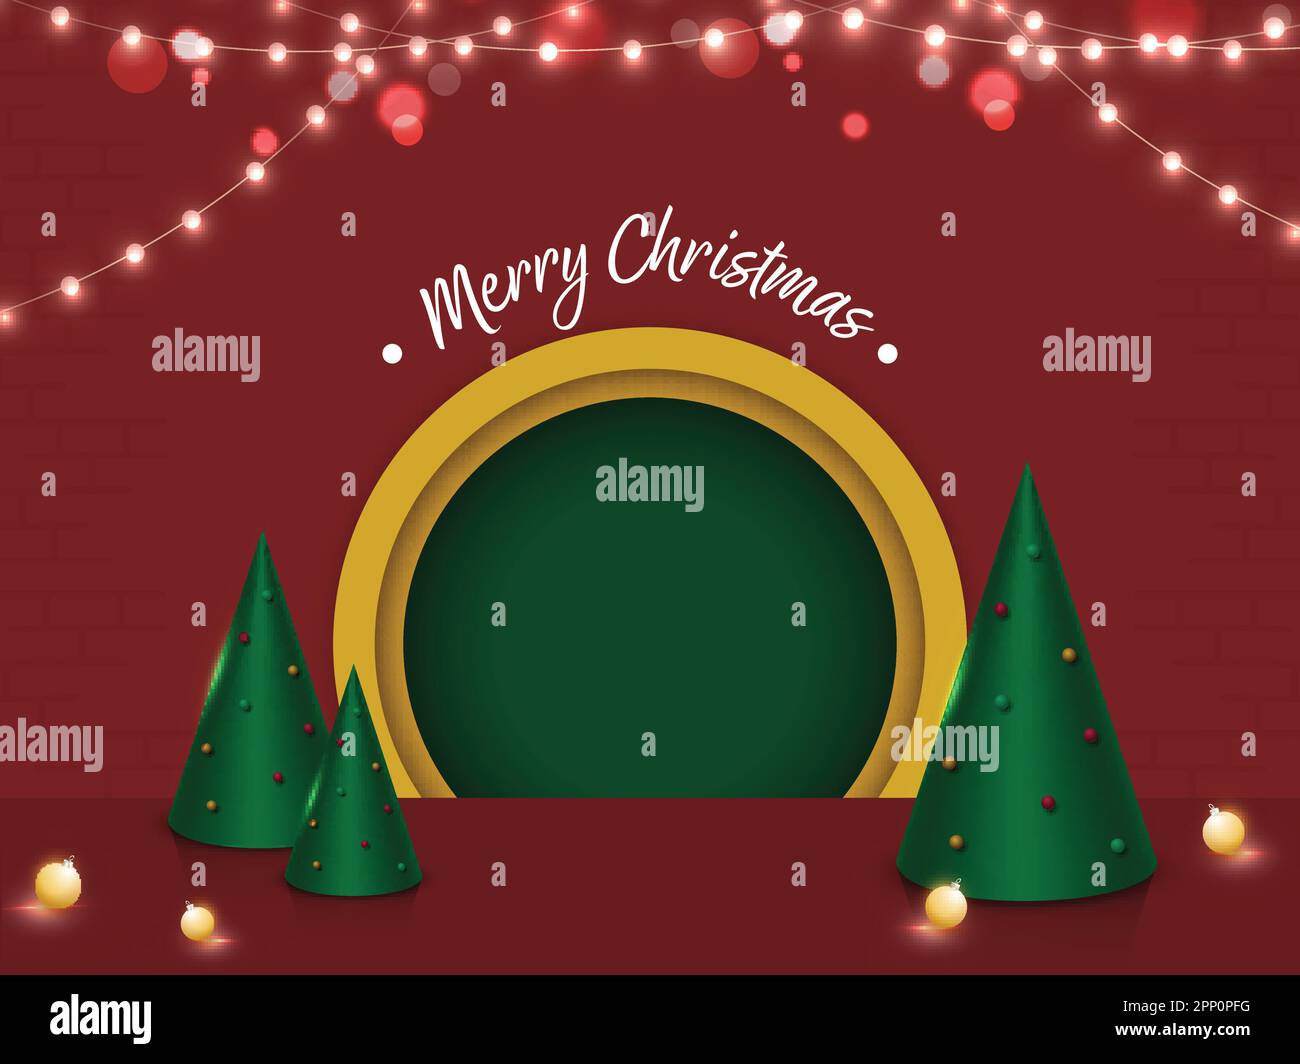 Merry Christmas Poster Design With 3D Render Cone Shaped Xmas Tree, Baubles, Lighting Garland Decorated Red Background And Empty Circular Frame. Stock Vector